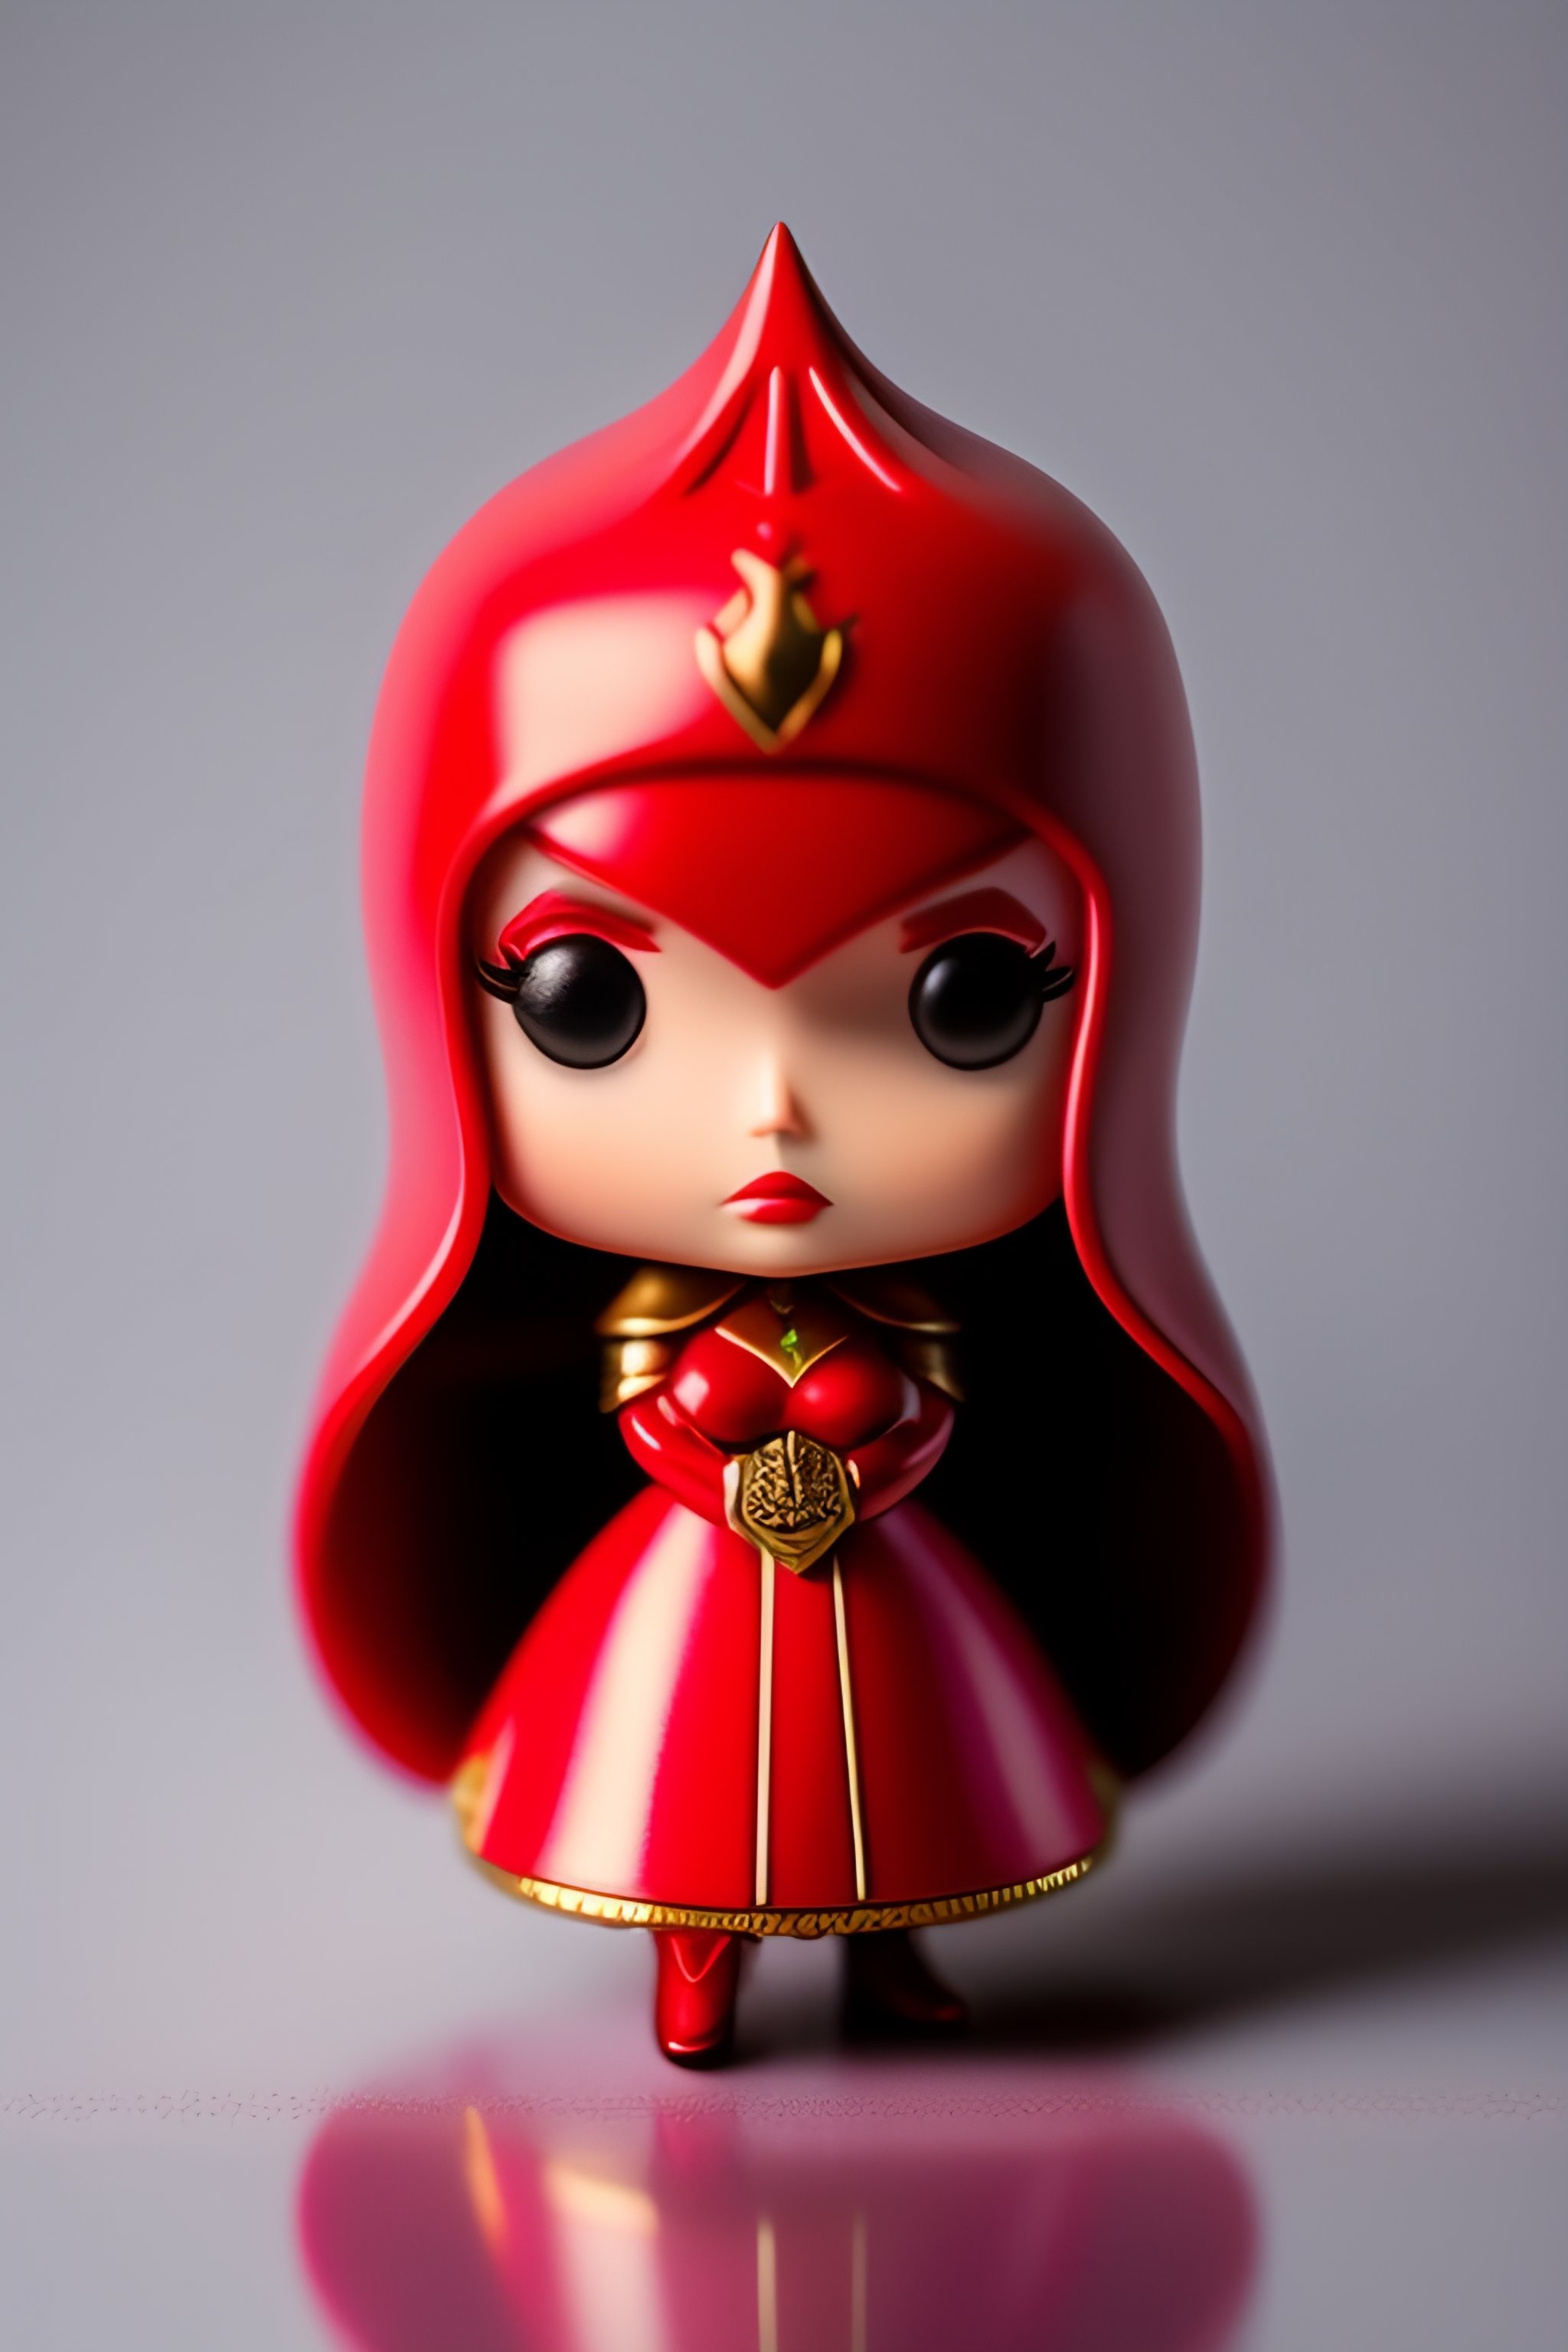 Lexica - Funko pop scarlet witch figurine, made of plastic, product ...